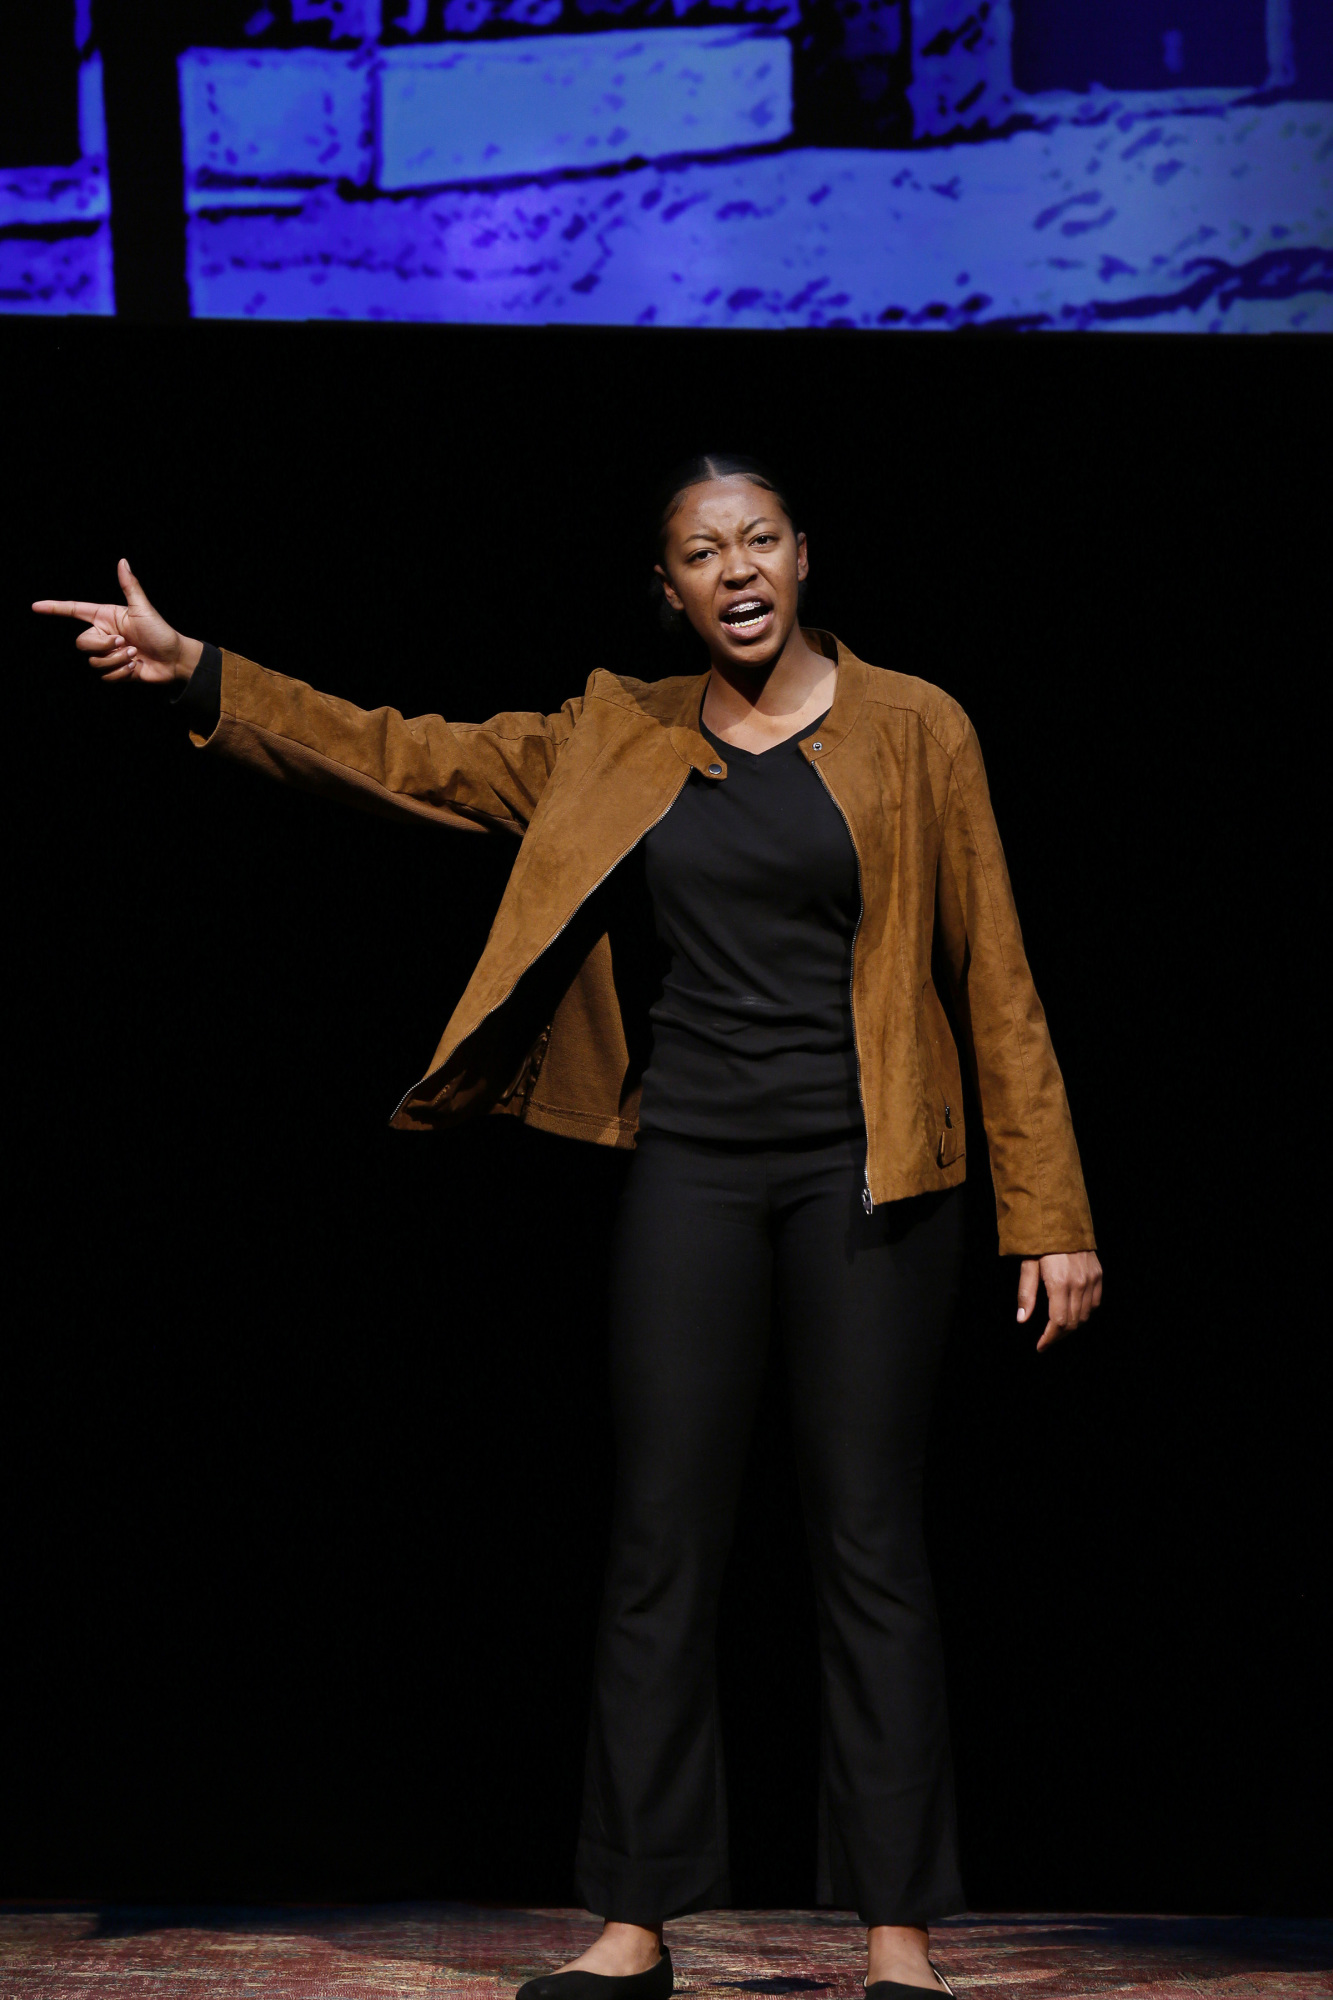 L.A. Student Takes Third Place in National August Wilson Monologue